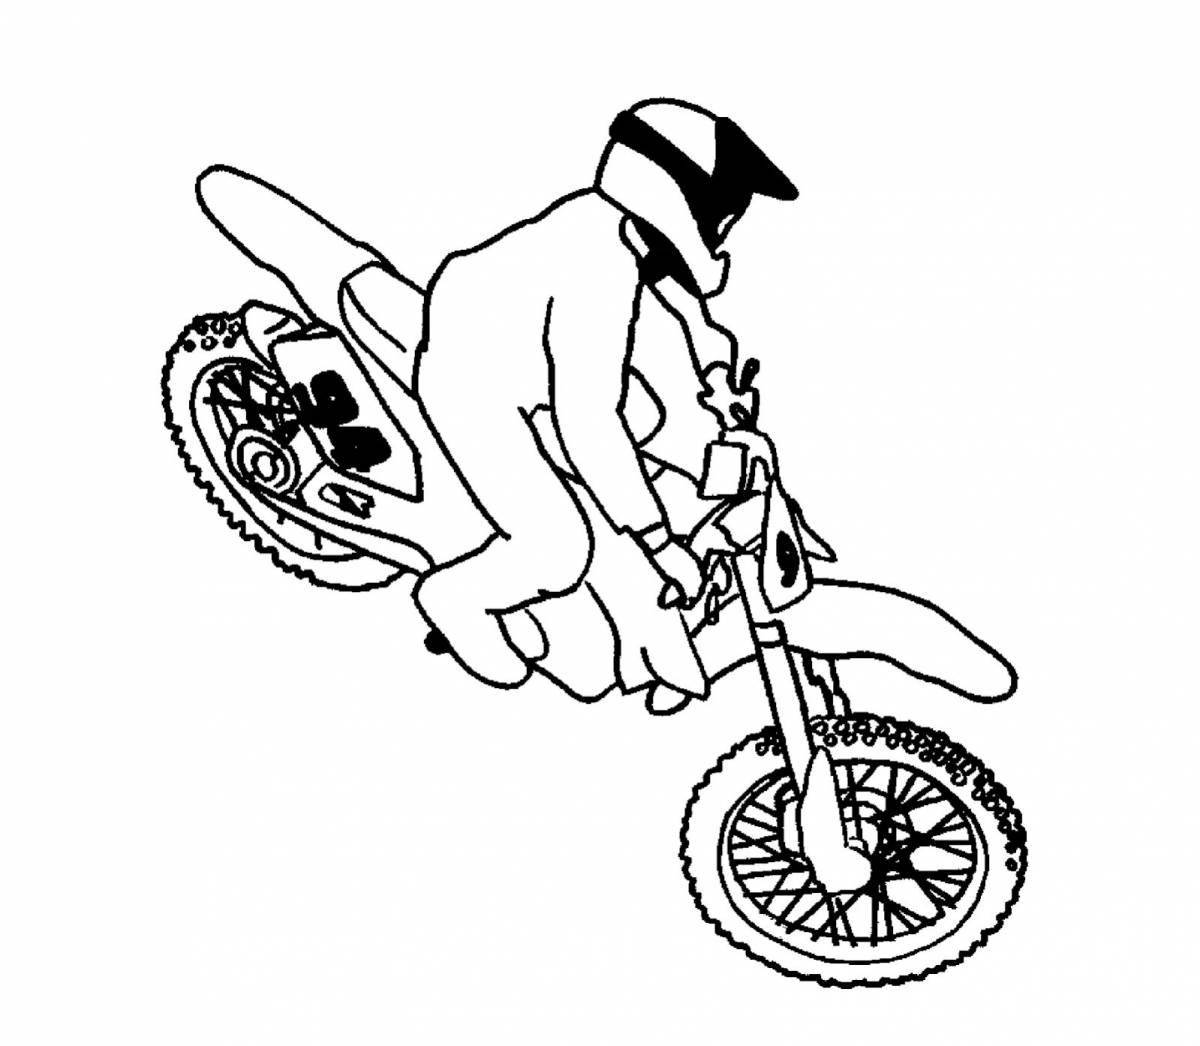 Playful motocross coloring page